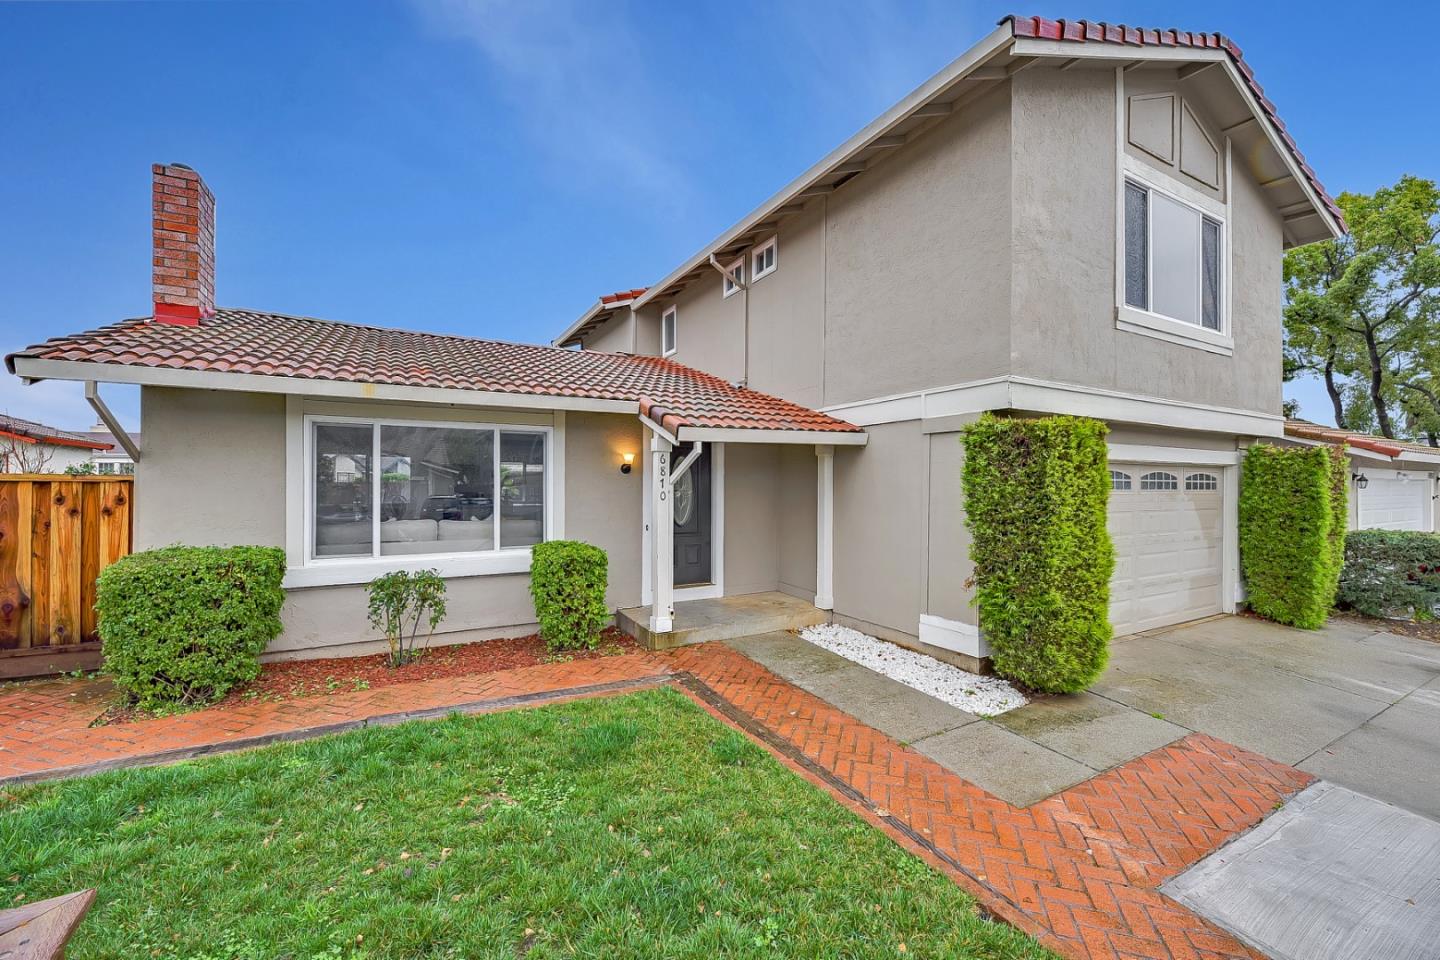 Photo of 6870 Glenview Dr in Gilroy, CA